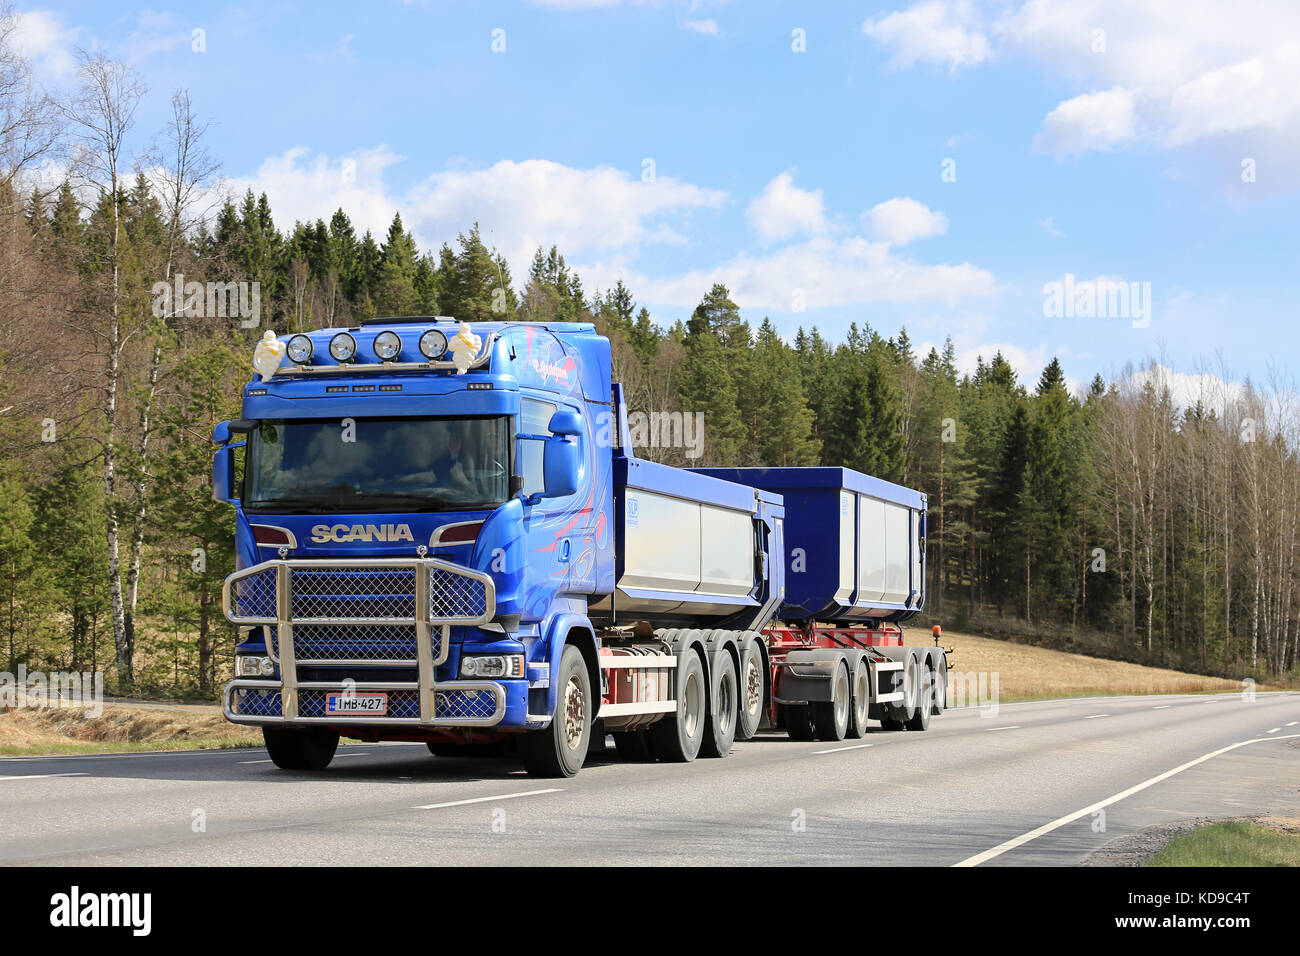 Page 7 - Tipper Truck Tipping High Resolution Stock Photography and Images  - Alamy